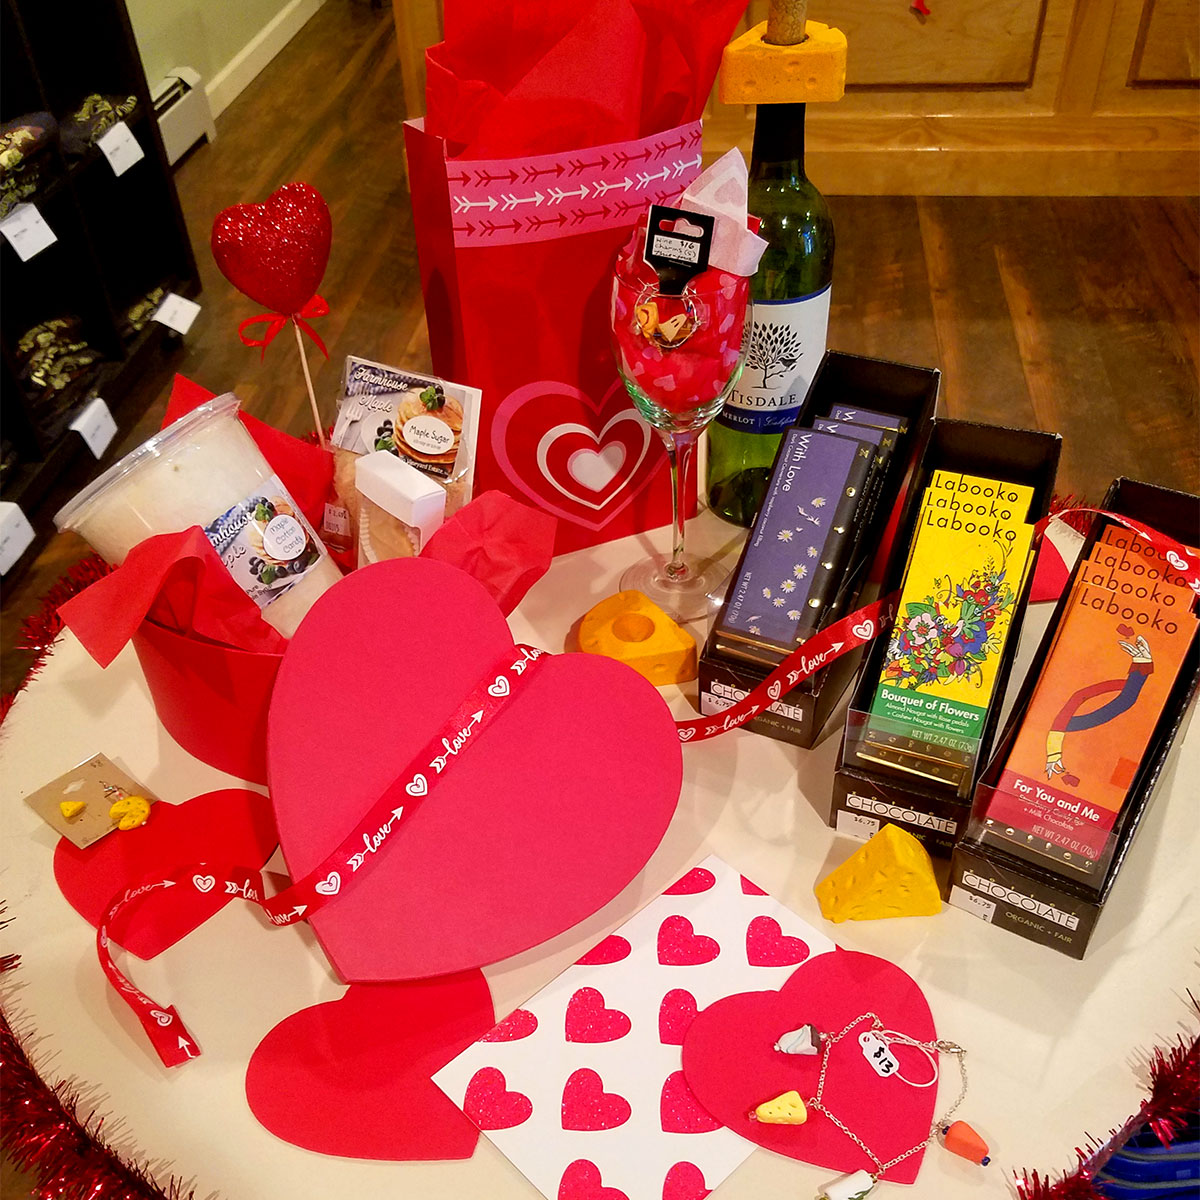 A table covered with Valentine's Day decor and gifts from the cheese shop.